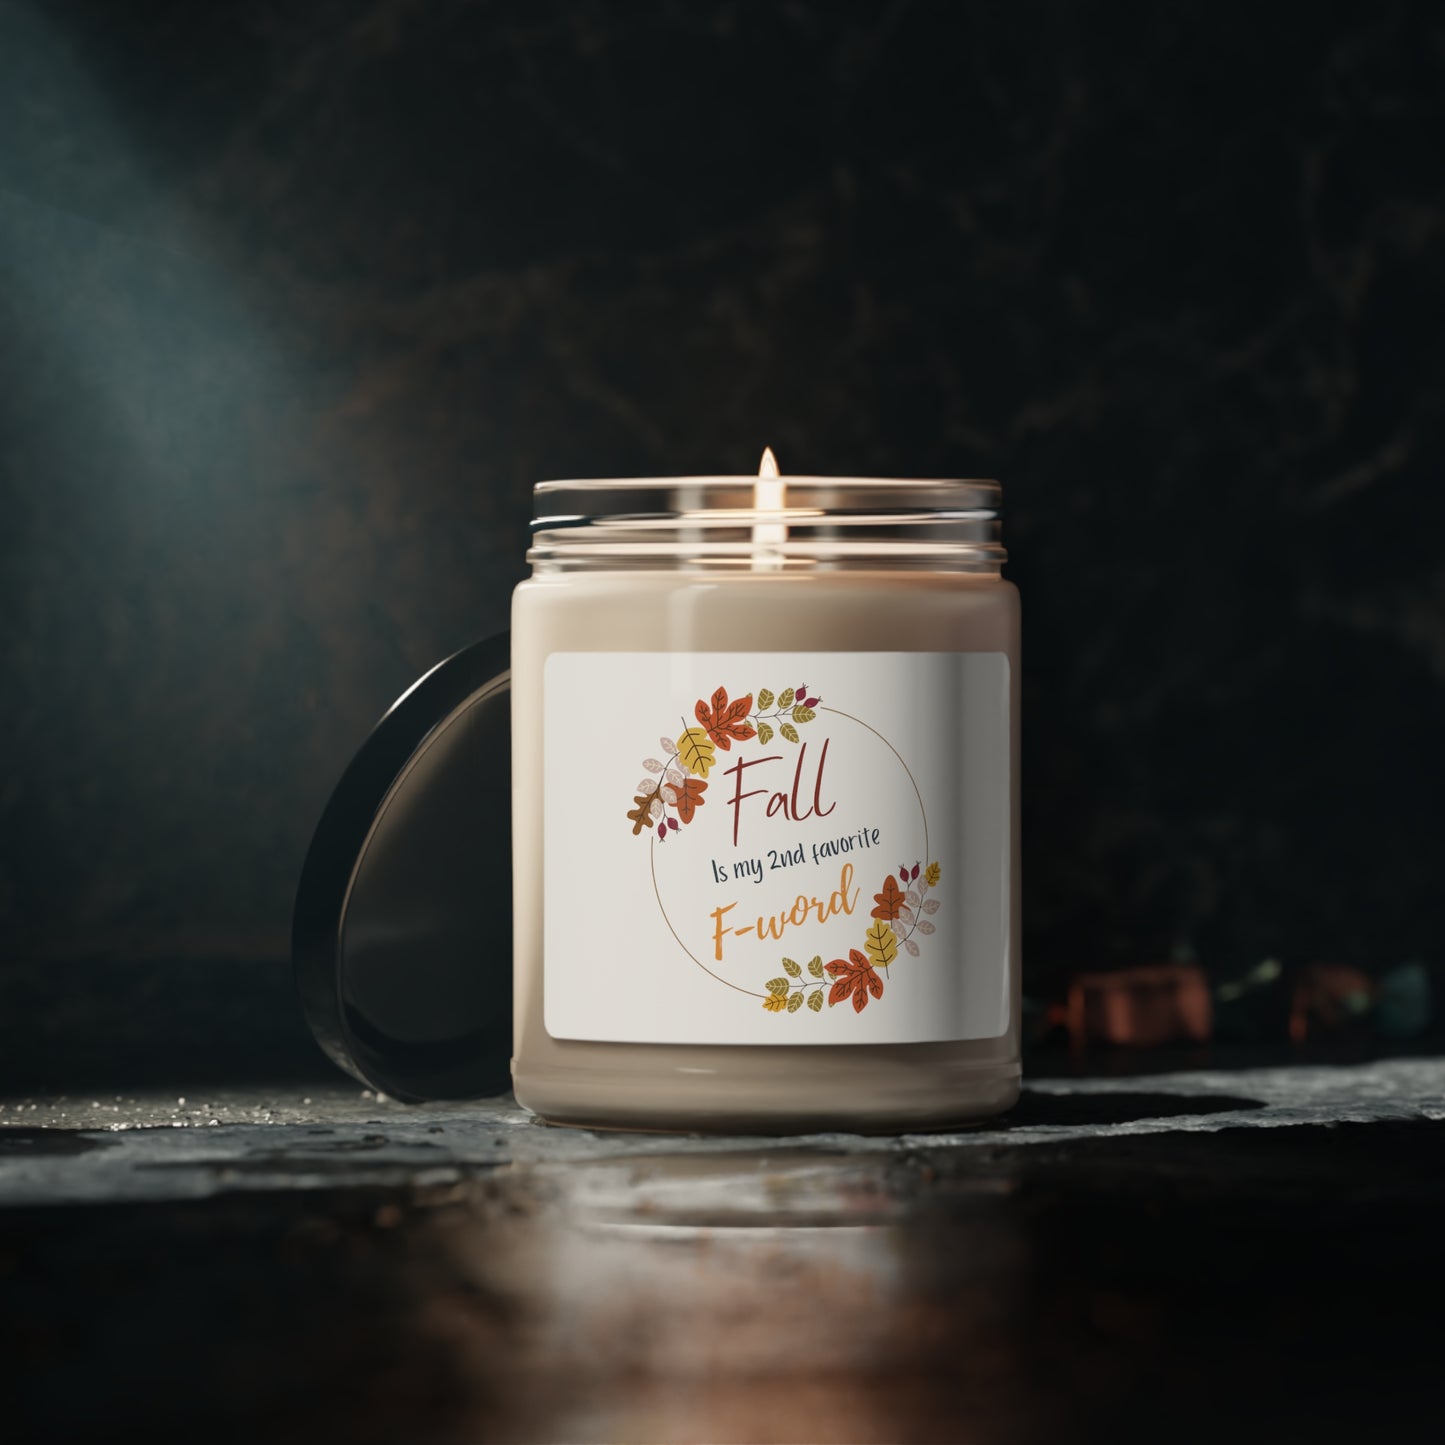 Fall Time Candle